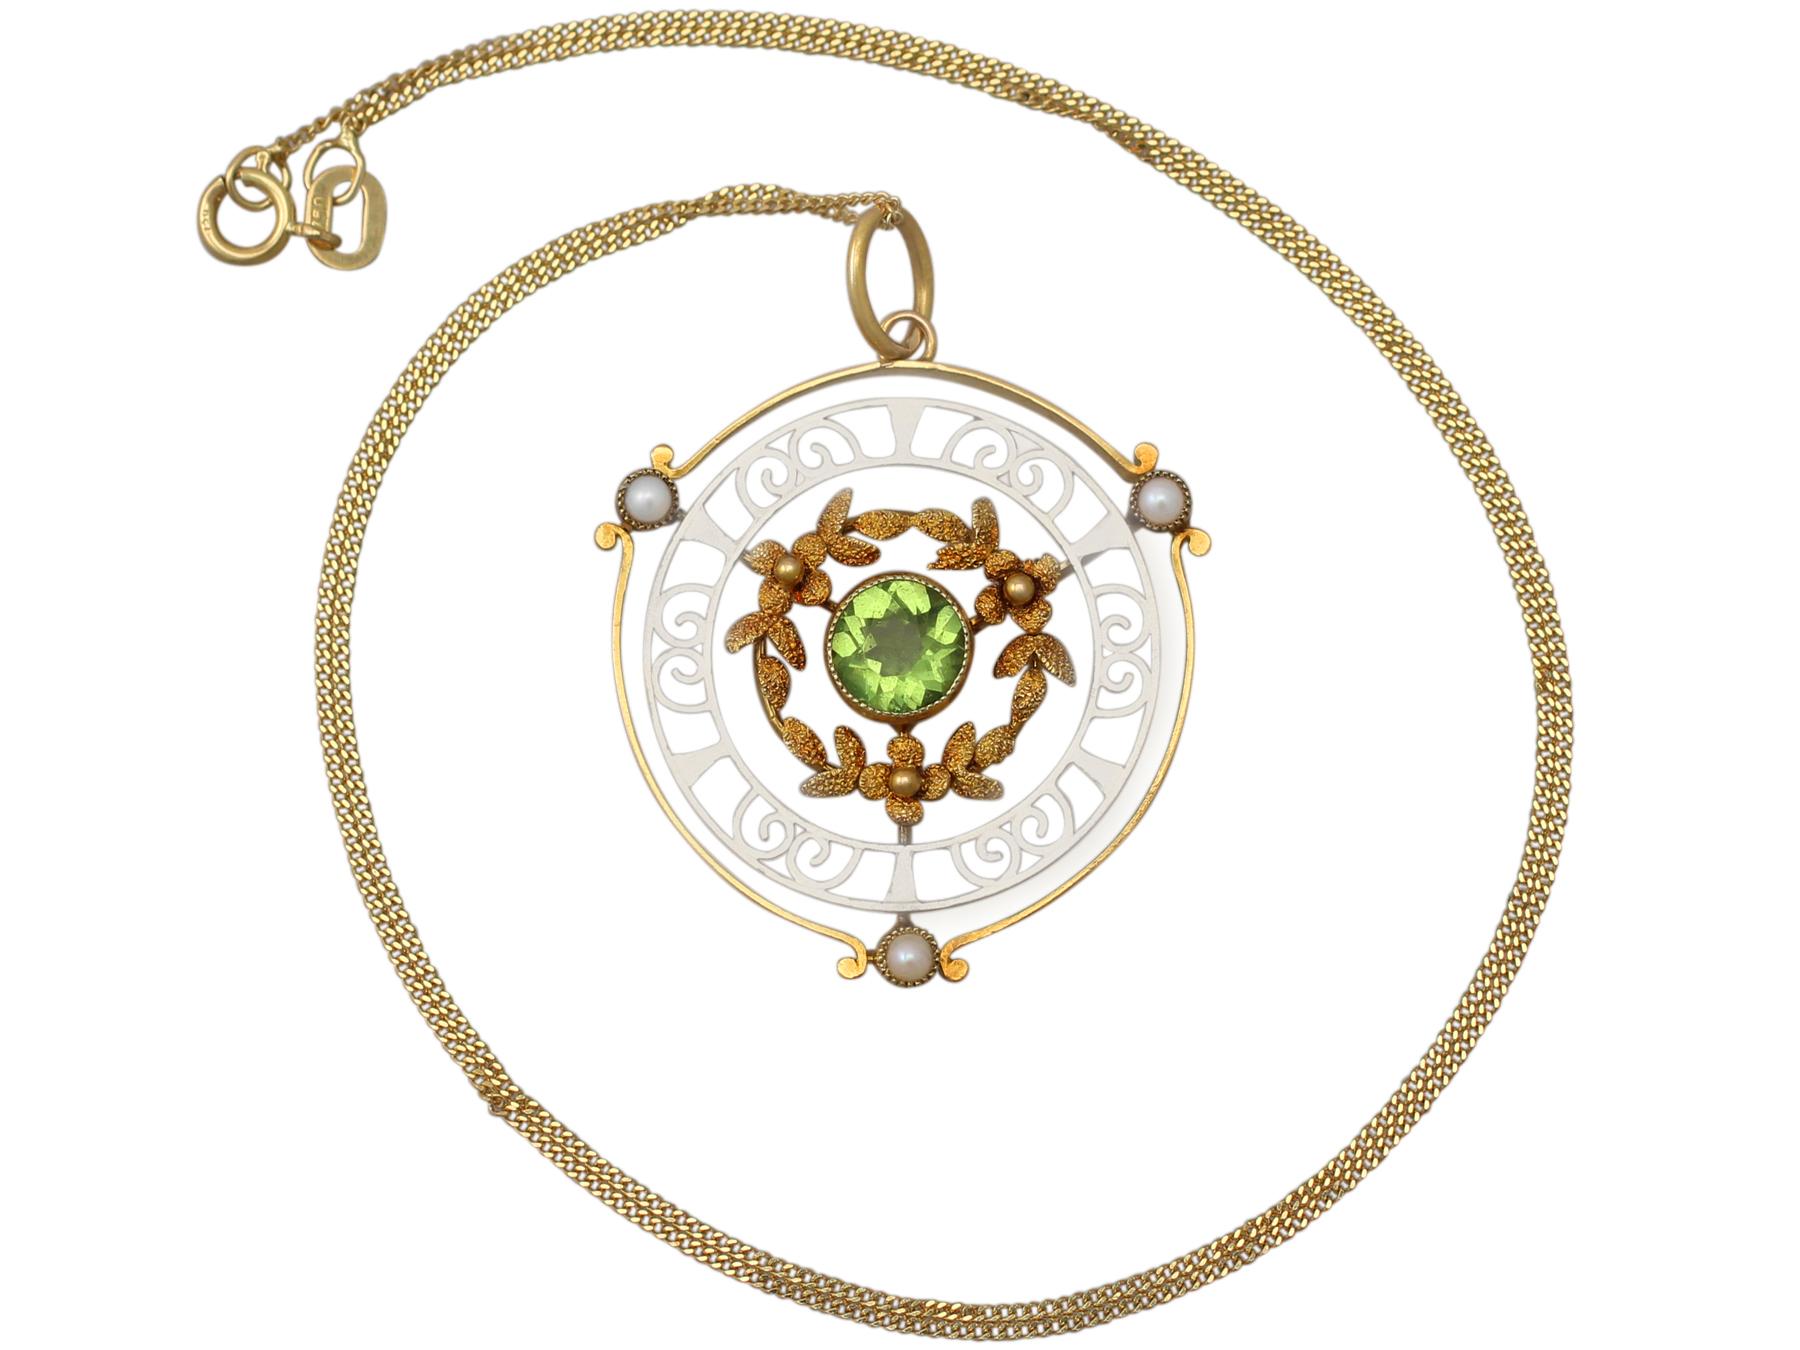 A fine and impressive antique 0.85 carat natural peridot and seed pearl, 15 karat yellow gold, 15 karat white gold pendant; part of our antique jewelry and estate jewelry collections.

This fine and impressive antique pendant has been crafted in 15k